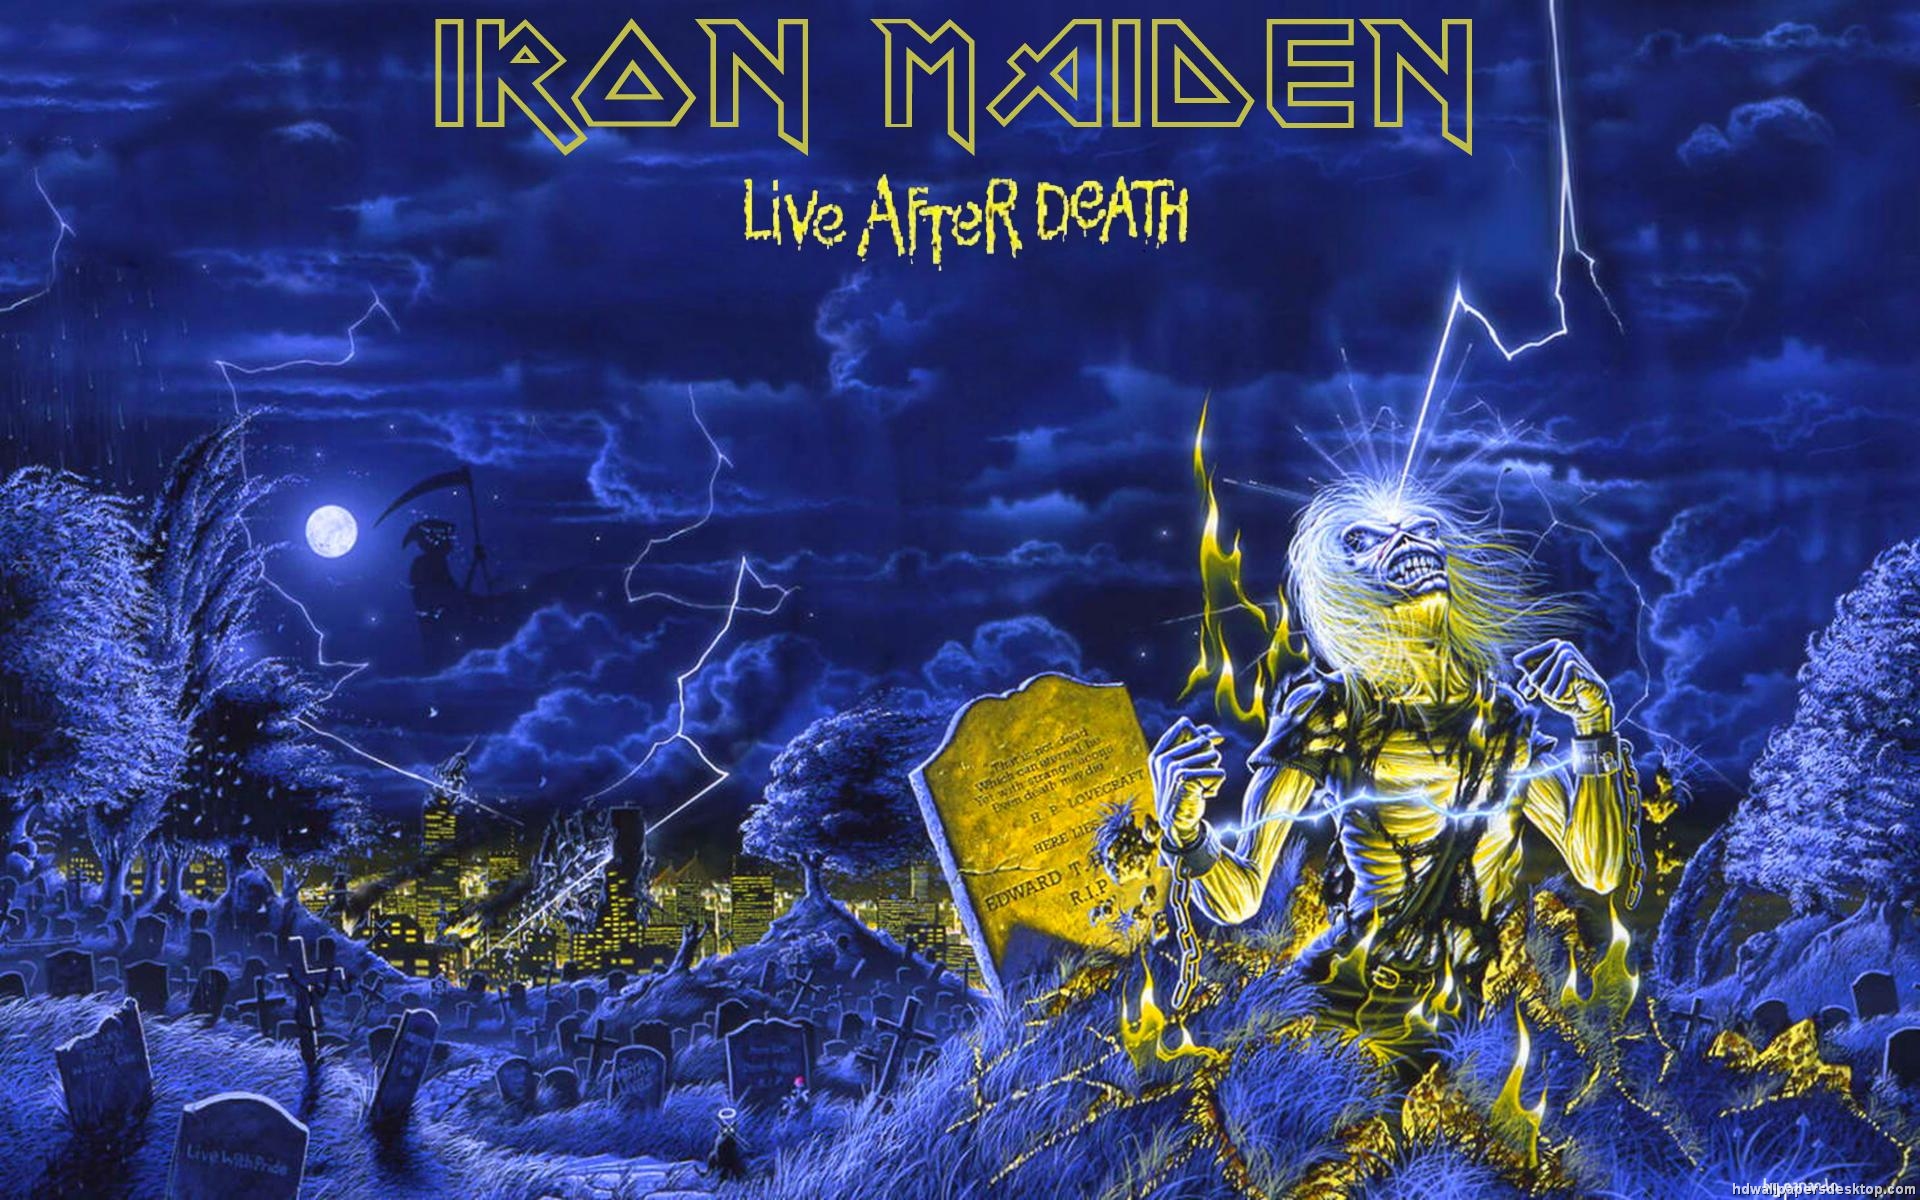 Live After Death - Iron Maiden Live After Death - HD Wallpaper 